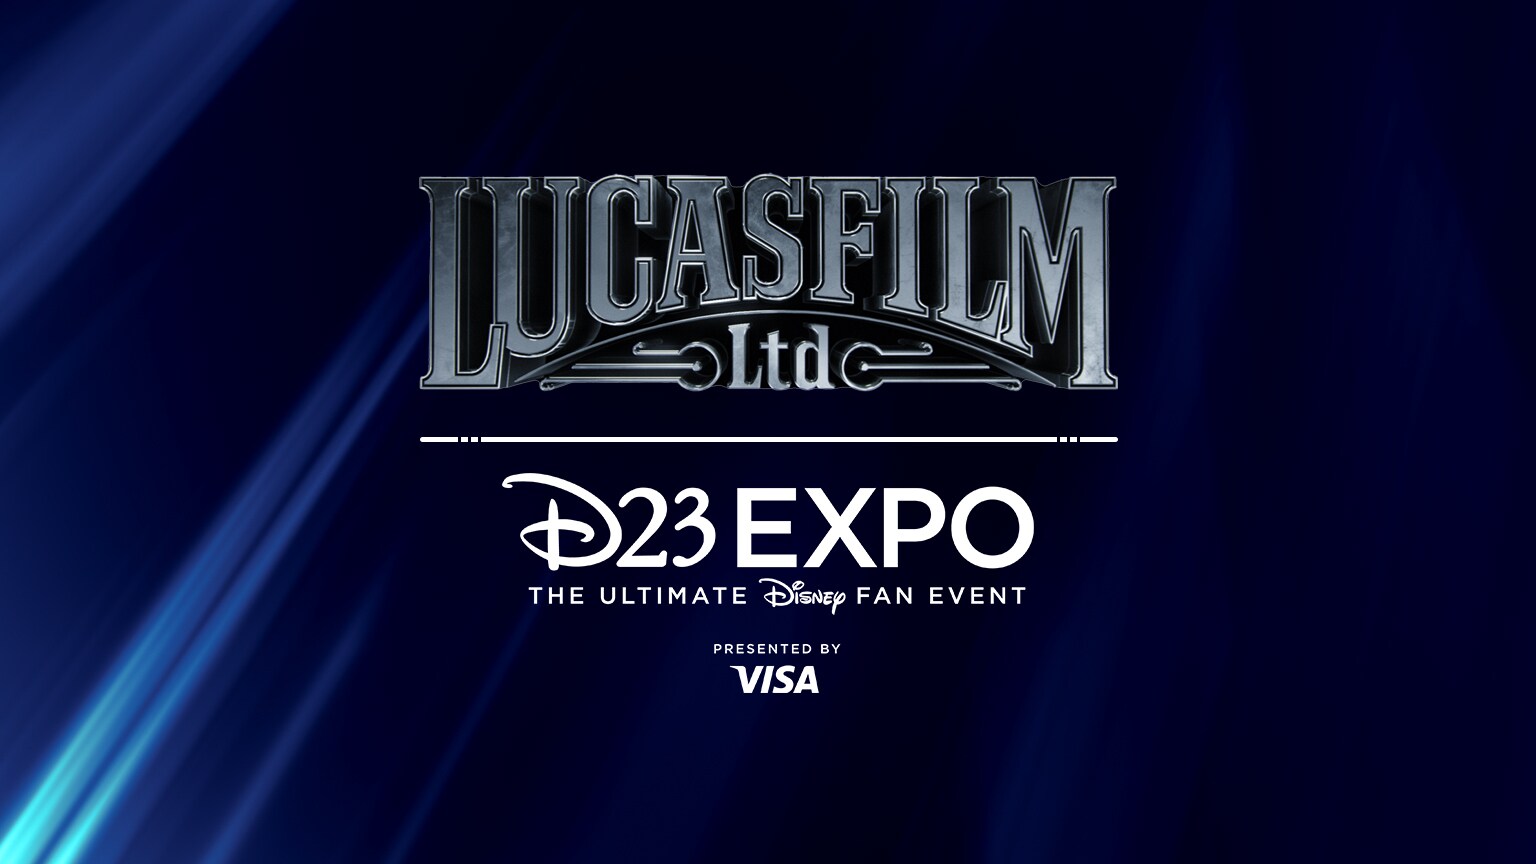 The Lucasfilm and D23 Expo 2022 logos.